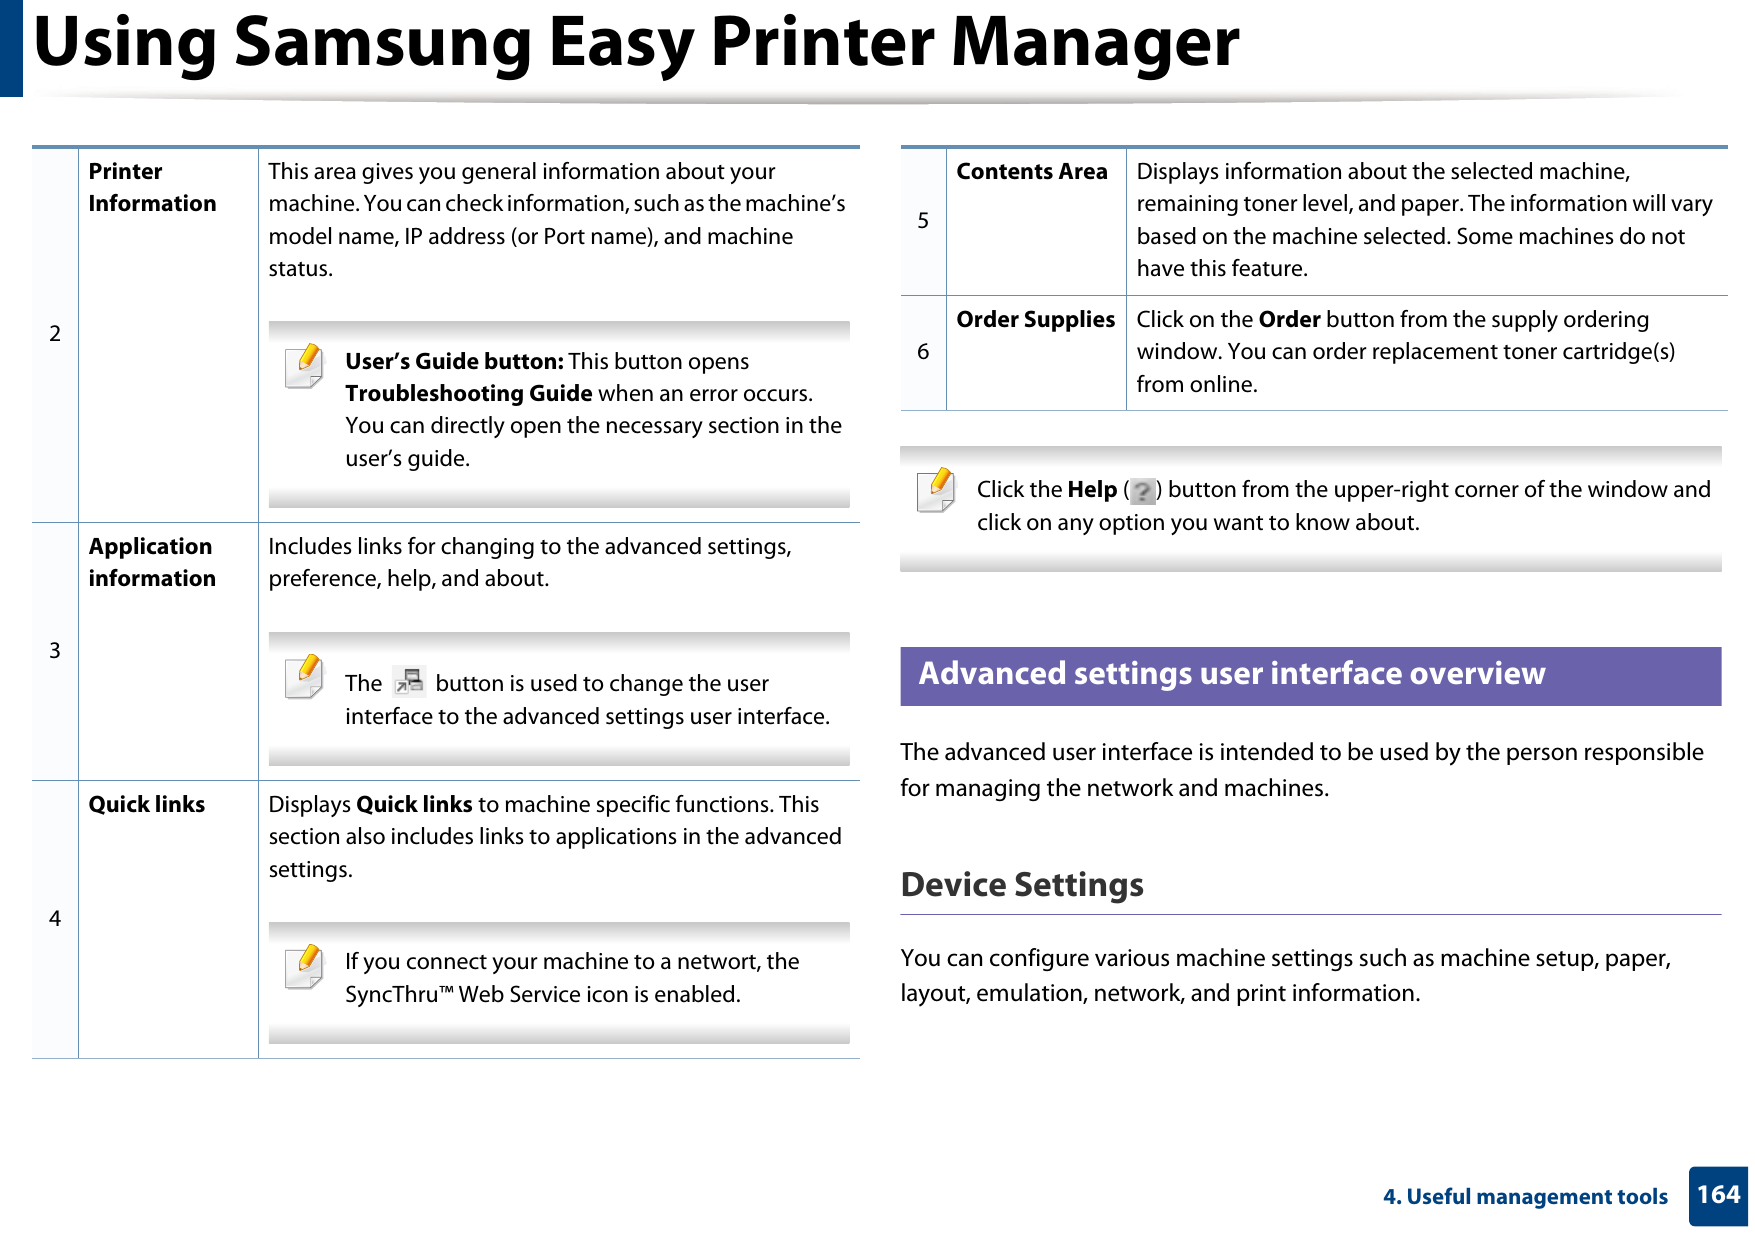 Using Samsung Easy Printer Manager1644. Useful management tools Click the Help ( ) button from the upper-right corner of the window and click on any option you want to know about.  6 Advanced settings user interface overviewThe advanced user interface is intended to be used by the person responsible for managing the network and machines.Device SettingsYou can configure various machine settings such as machine setup, paper, layout, emulation, network, and print information.2Printer InformationThis area gives you general information about your machine. You can check information, such as the machine’s model name, IP address (or Port name), and machine status. User’s Guide button: This button opens Troubleshooting Guide when an error occurs. You can directly open the necessary section in the user’s guide.  3Application informationIncludes links for changing to the advanced settings, preference, help, and about. The   button is used to change the user interface to the advanced settings user interface. 4Quick links Displays Quick links to machine specific functions. This section also includes links to applications in the advanced settings. If you connect your machine to a networt, the SyncThru™ Web Service icon is enabled. 5Contents Area Displays information about the selected machine, remaining toner level, and paper. The information will vary based on the machine selected. Some machines do not have this feature.6Order Supplies Click on the Order button from the supply ordering window. You can order replacement toner cartridge(s) from online.